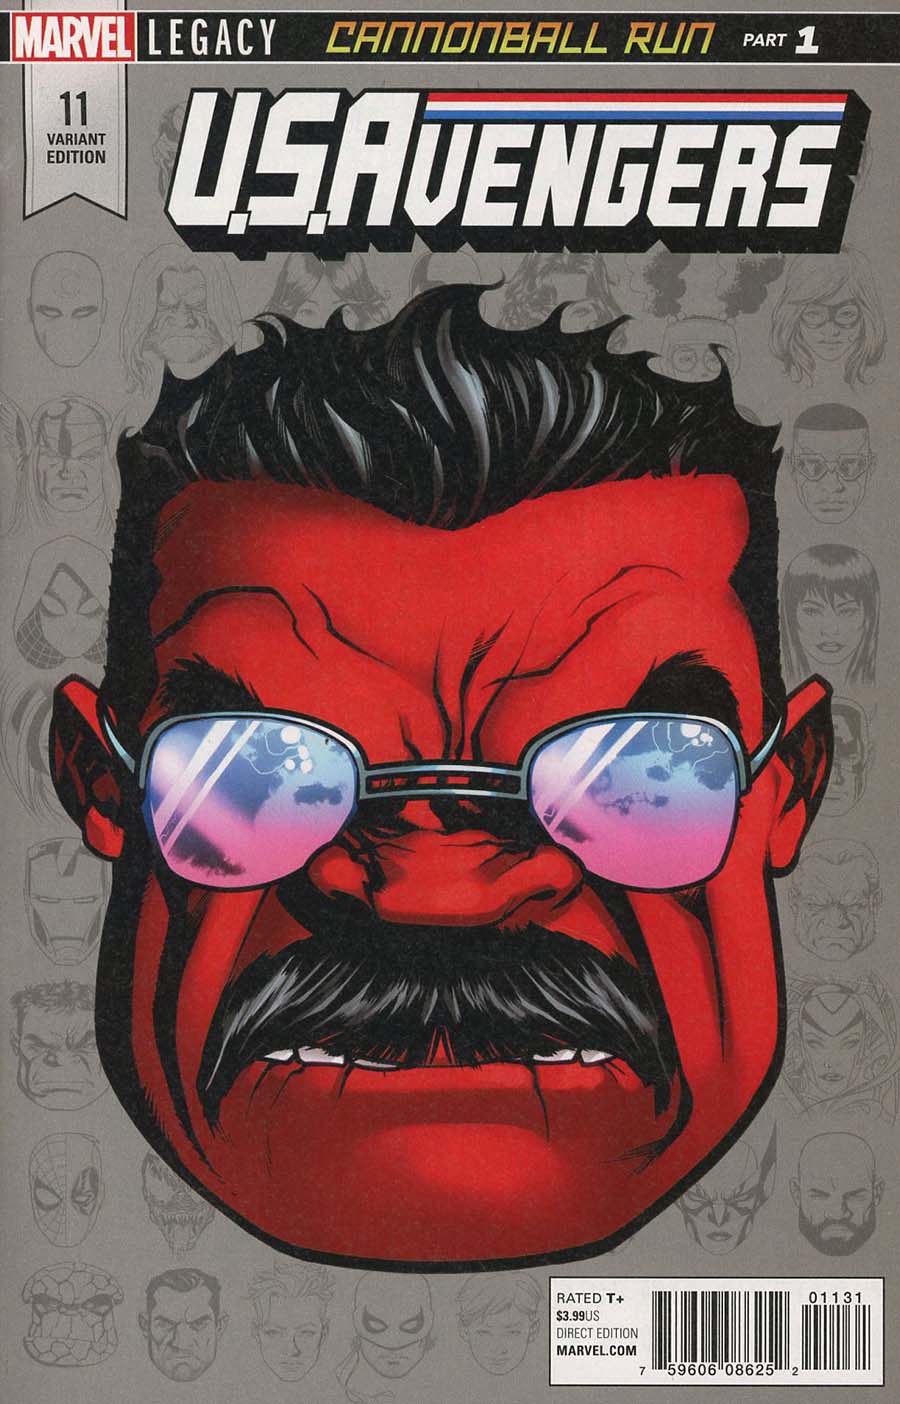 U.S.Avengers #11 Cover C Incentive Mike McKone Legacy Headshot Variant Cover (Marvel Legacy Tie-In)